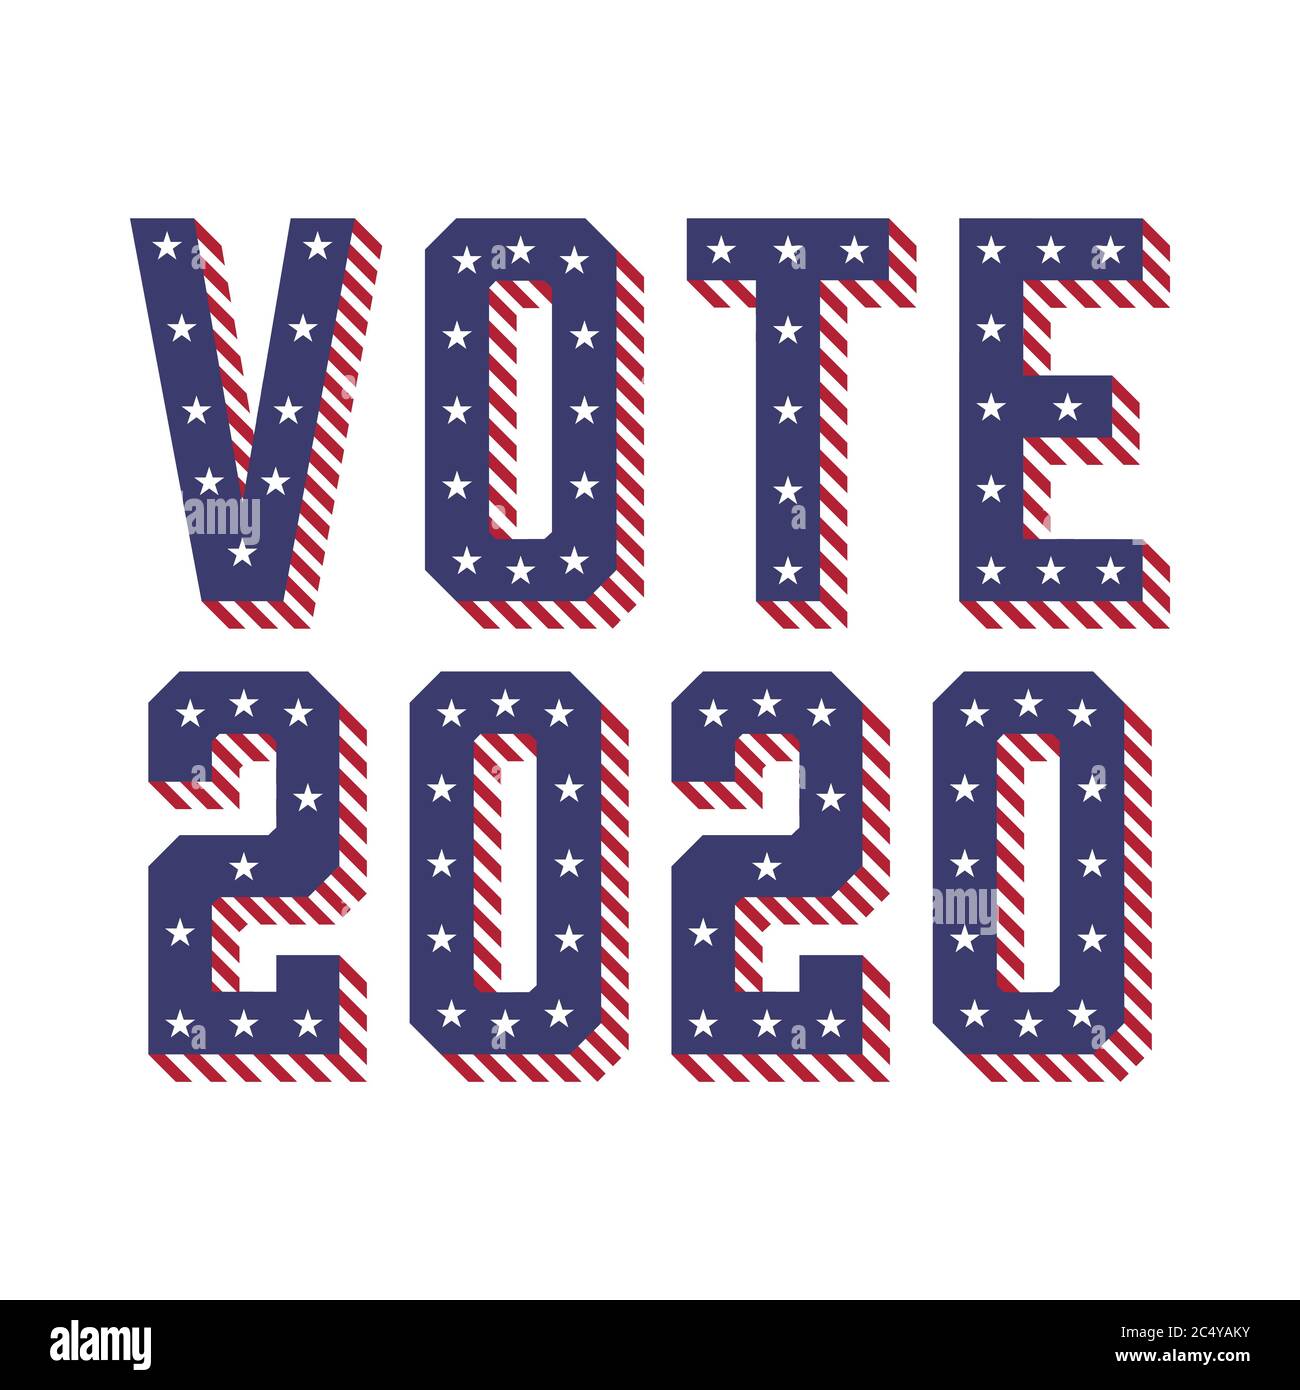 United States of America (USA) Elections VOTE 2020 with Stars and Stripes Concept Vector Illustration Stock Vector